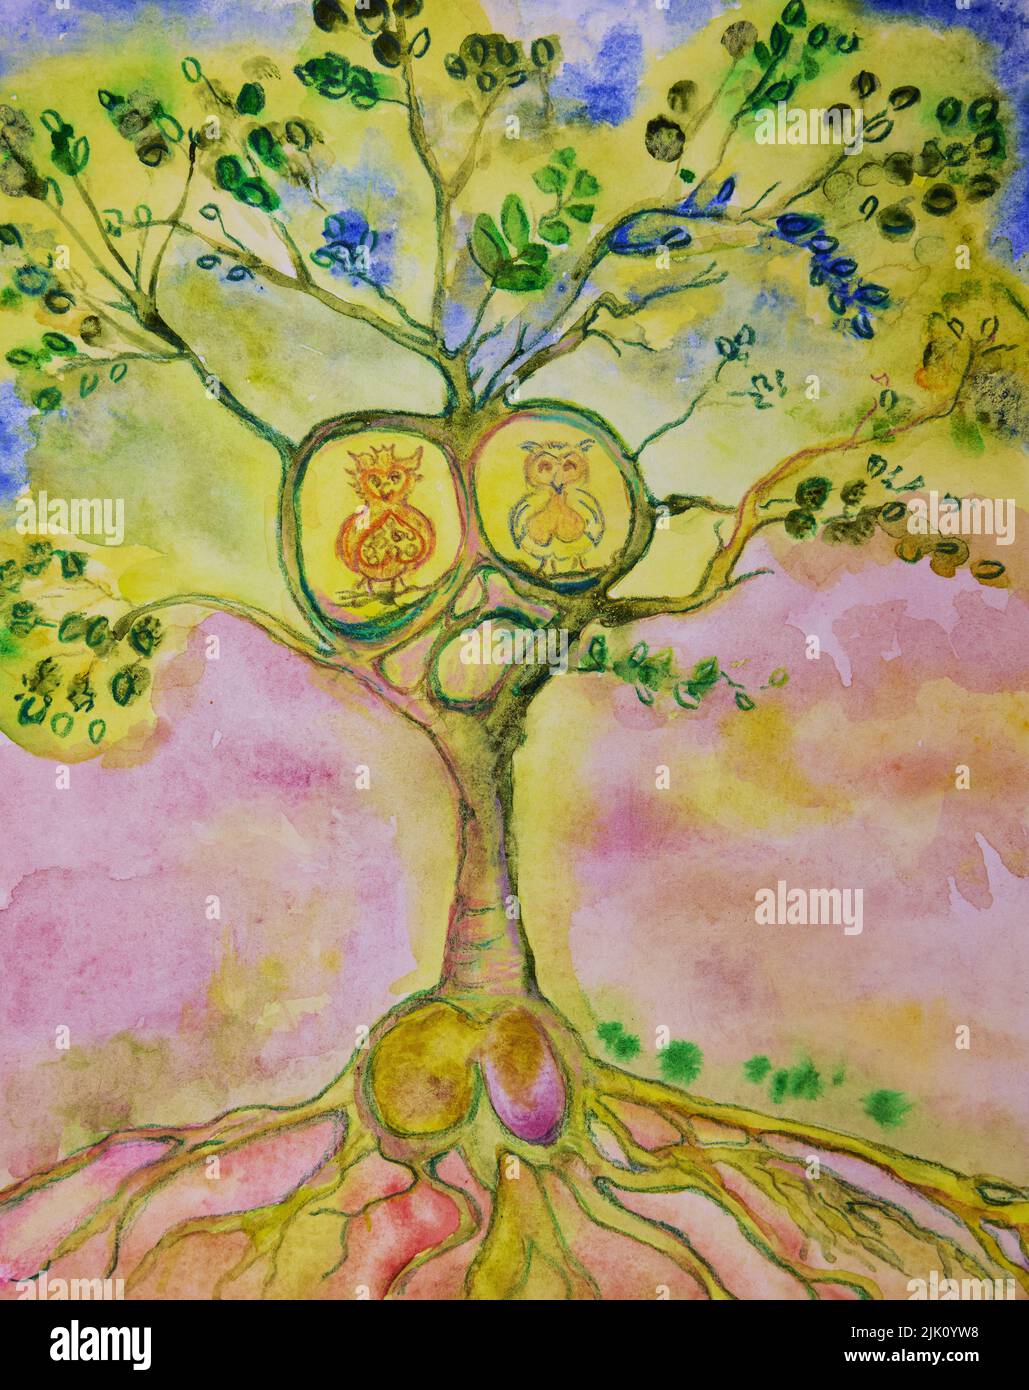 Tree of life with owls. The dabbing technique near the edges gives a soft focus effect due to the altered surface roughness of the paper. Stock Photo